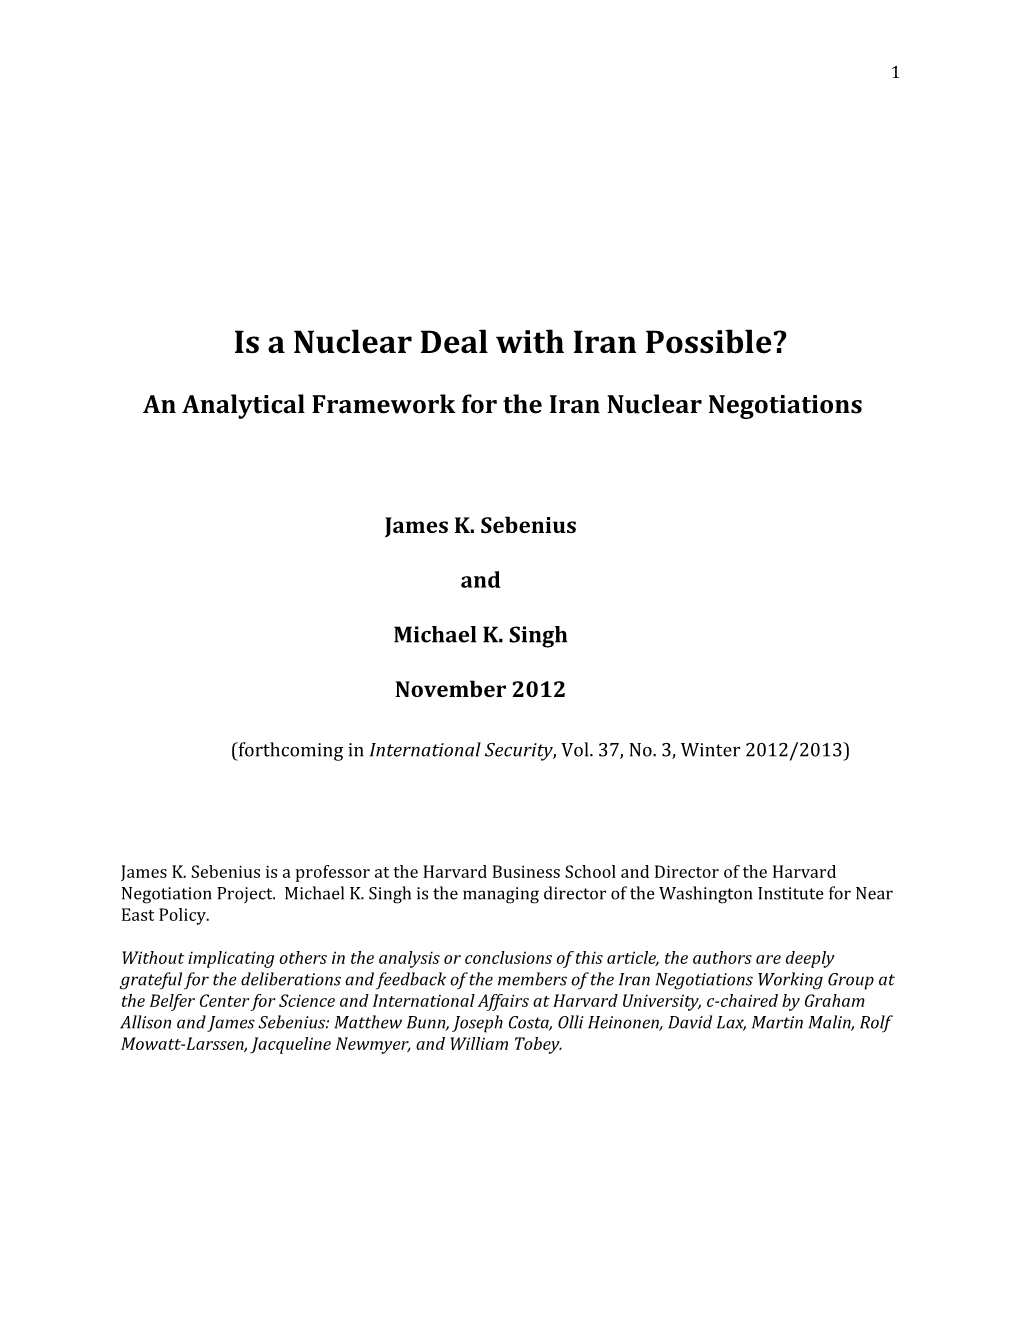 An Analytical Framework for the Iran Nuclear Negotiations